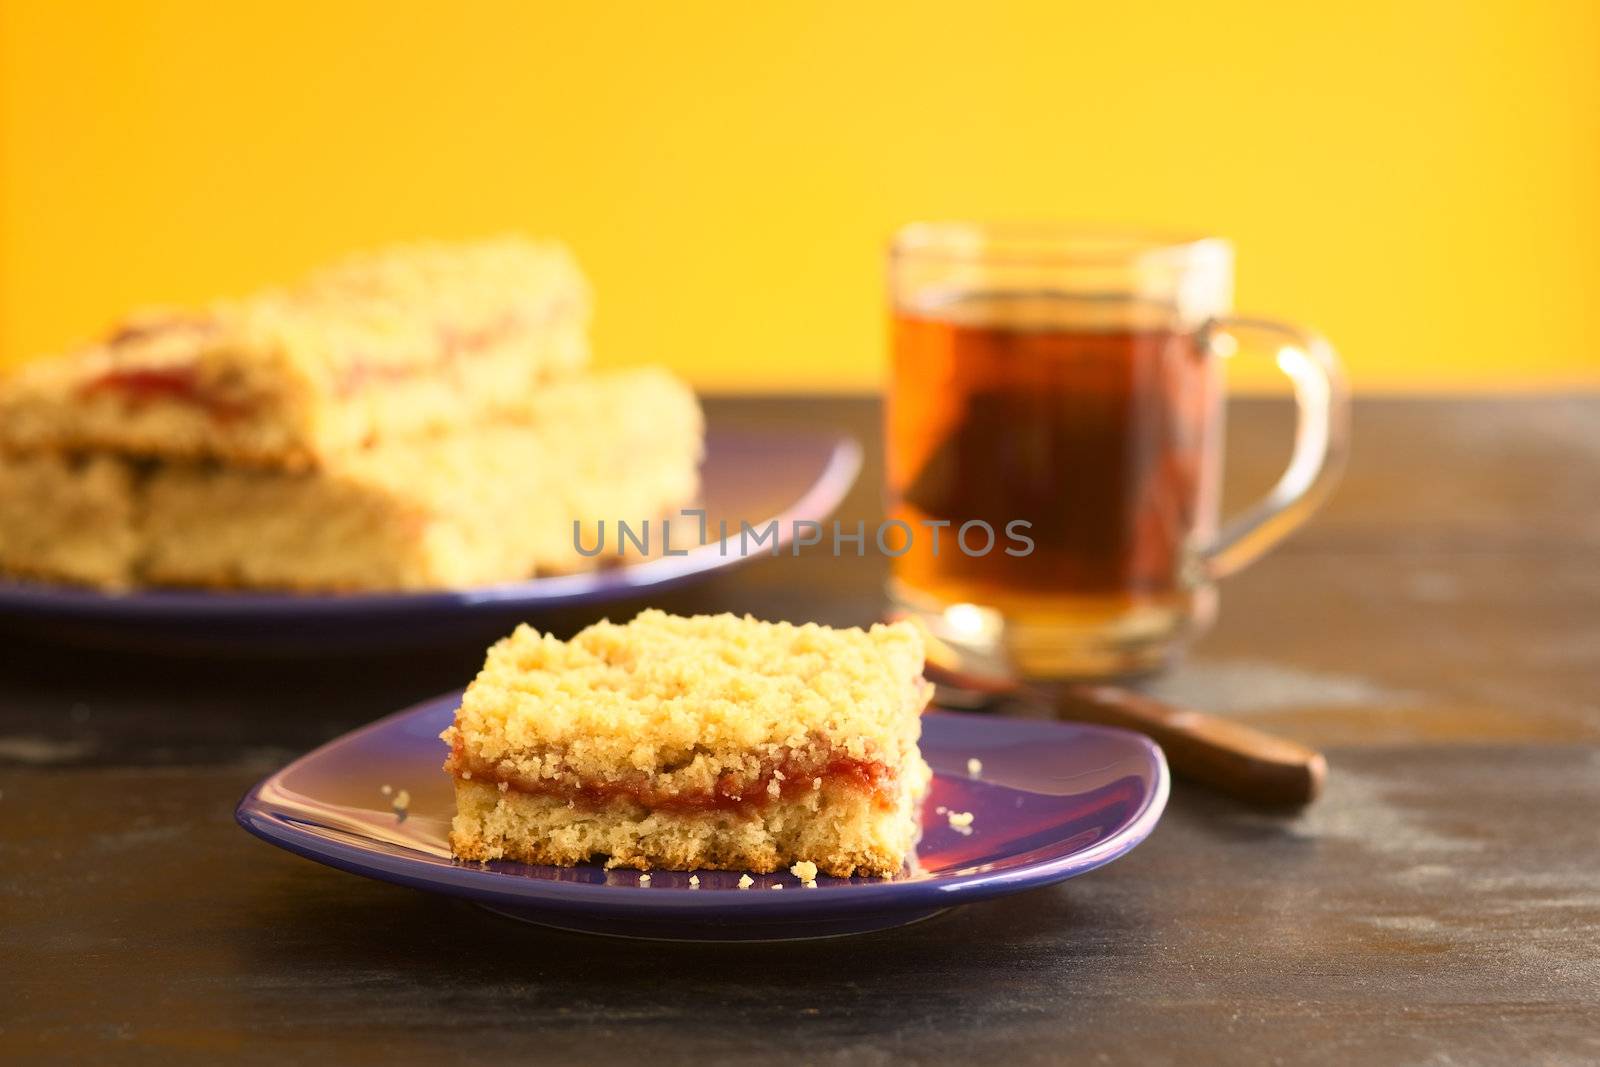 German cake called Streuselkuchen (Crumble cake) made of a yeast dough with jam and crumbles on top (Selective Focus, Focus on the front of the cake piece)